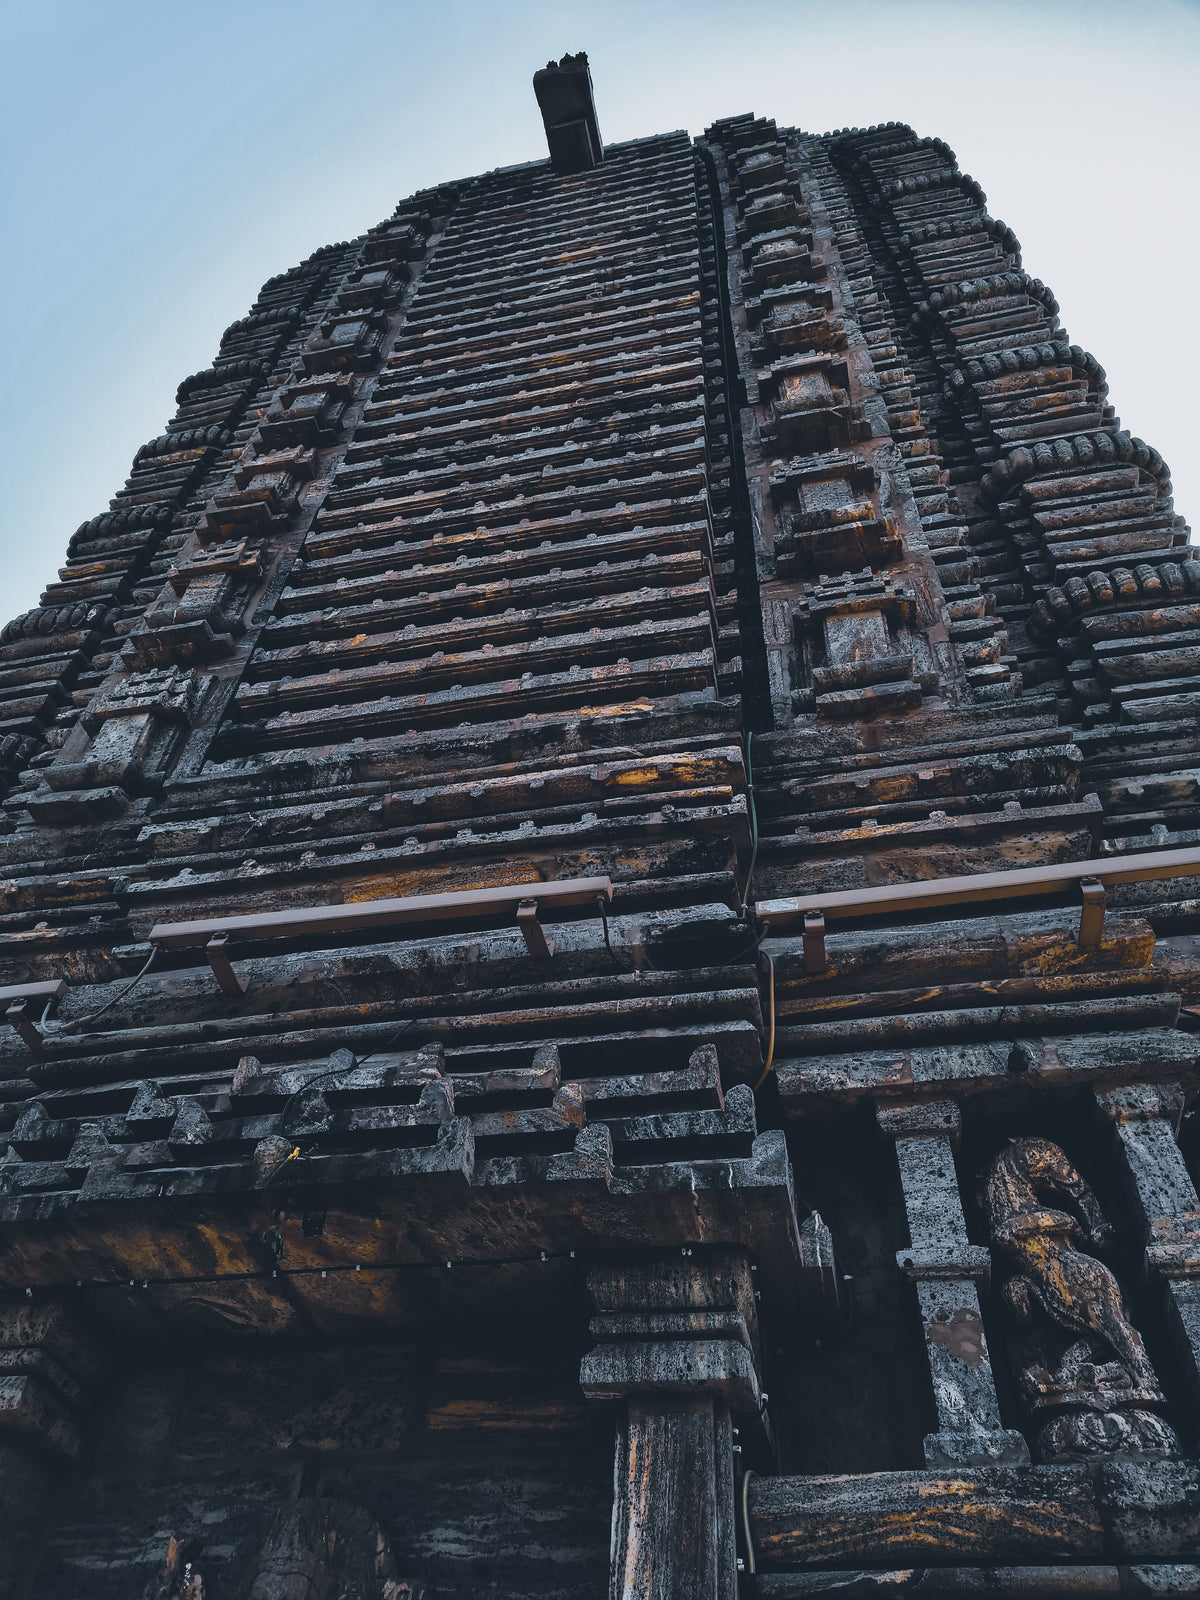 looking up at a tall temple